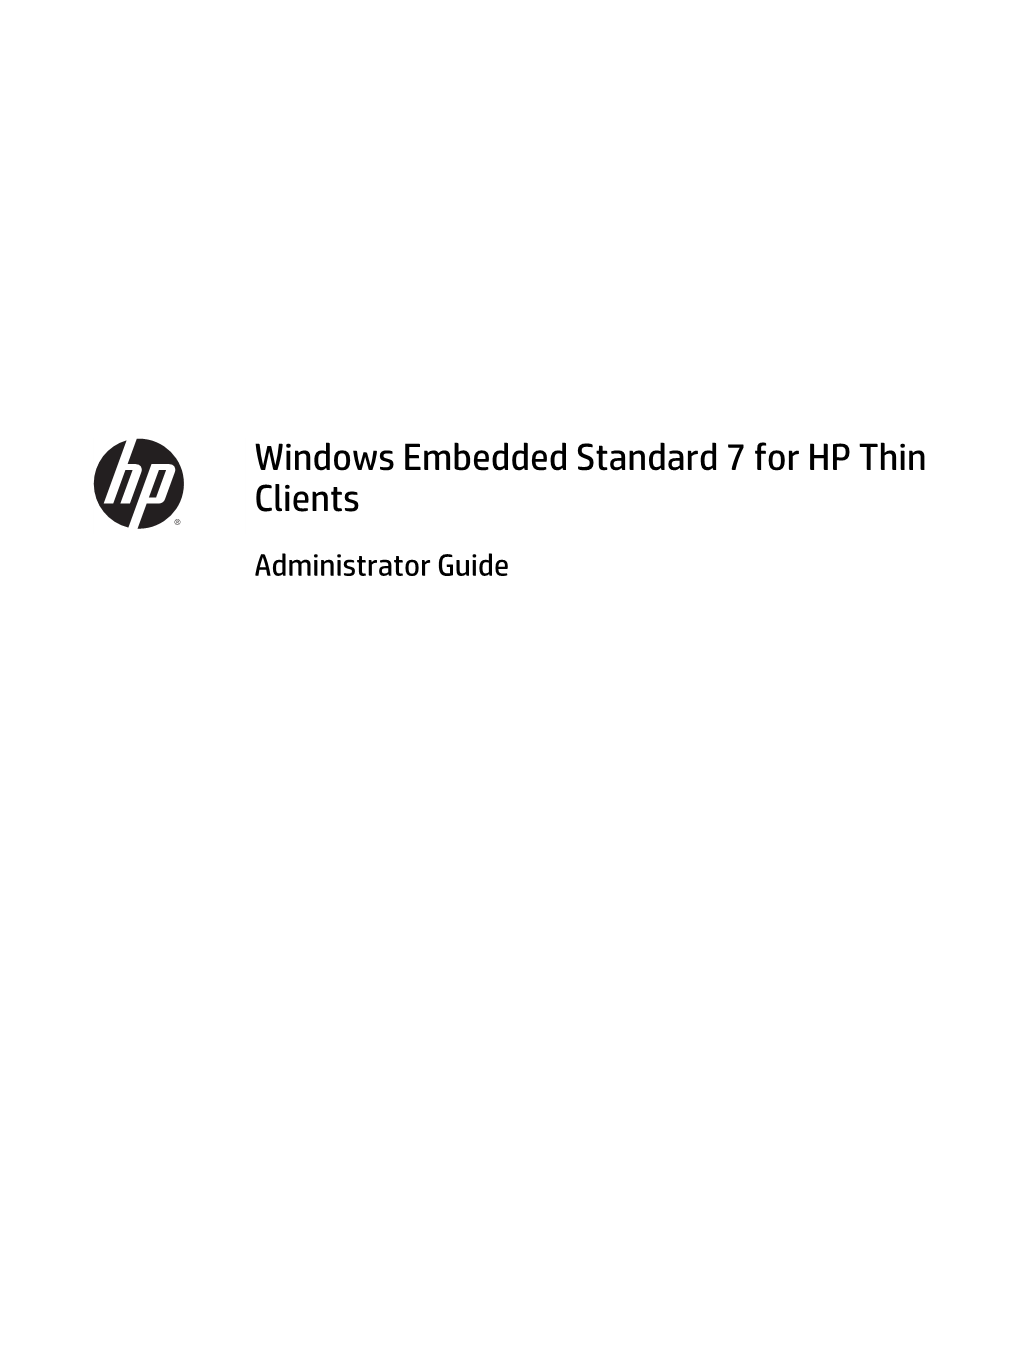 Windows Embedded Standard 7 for HP Thin Clients